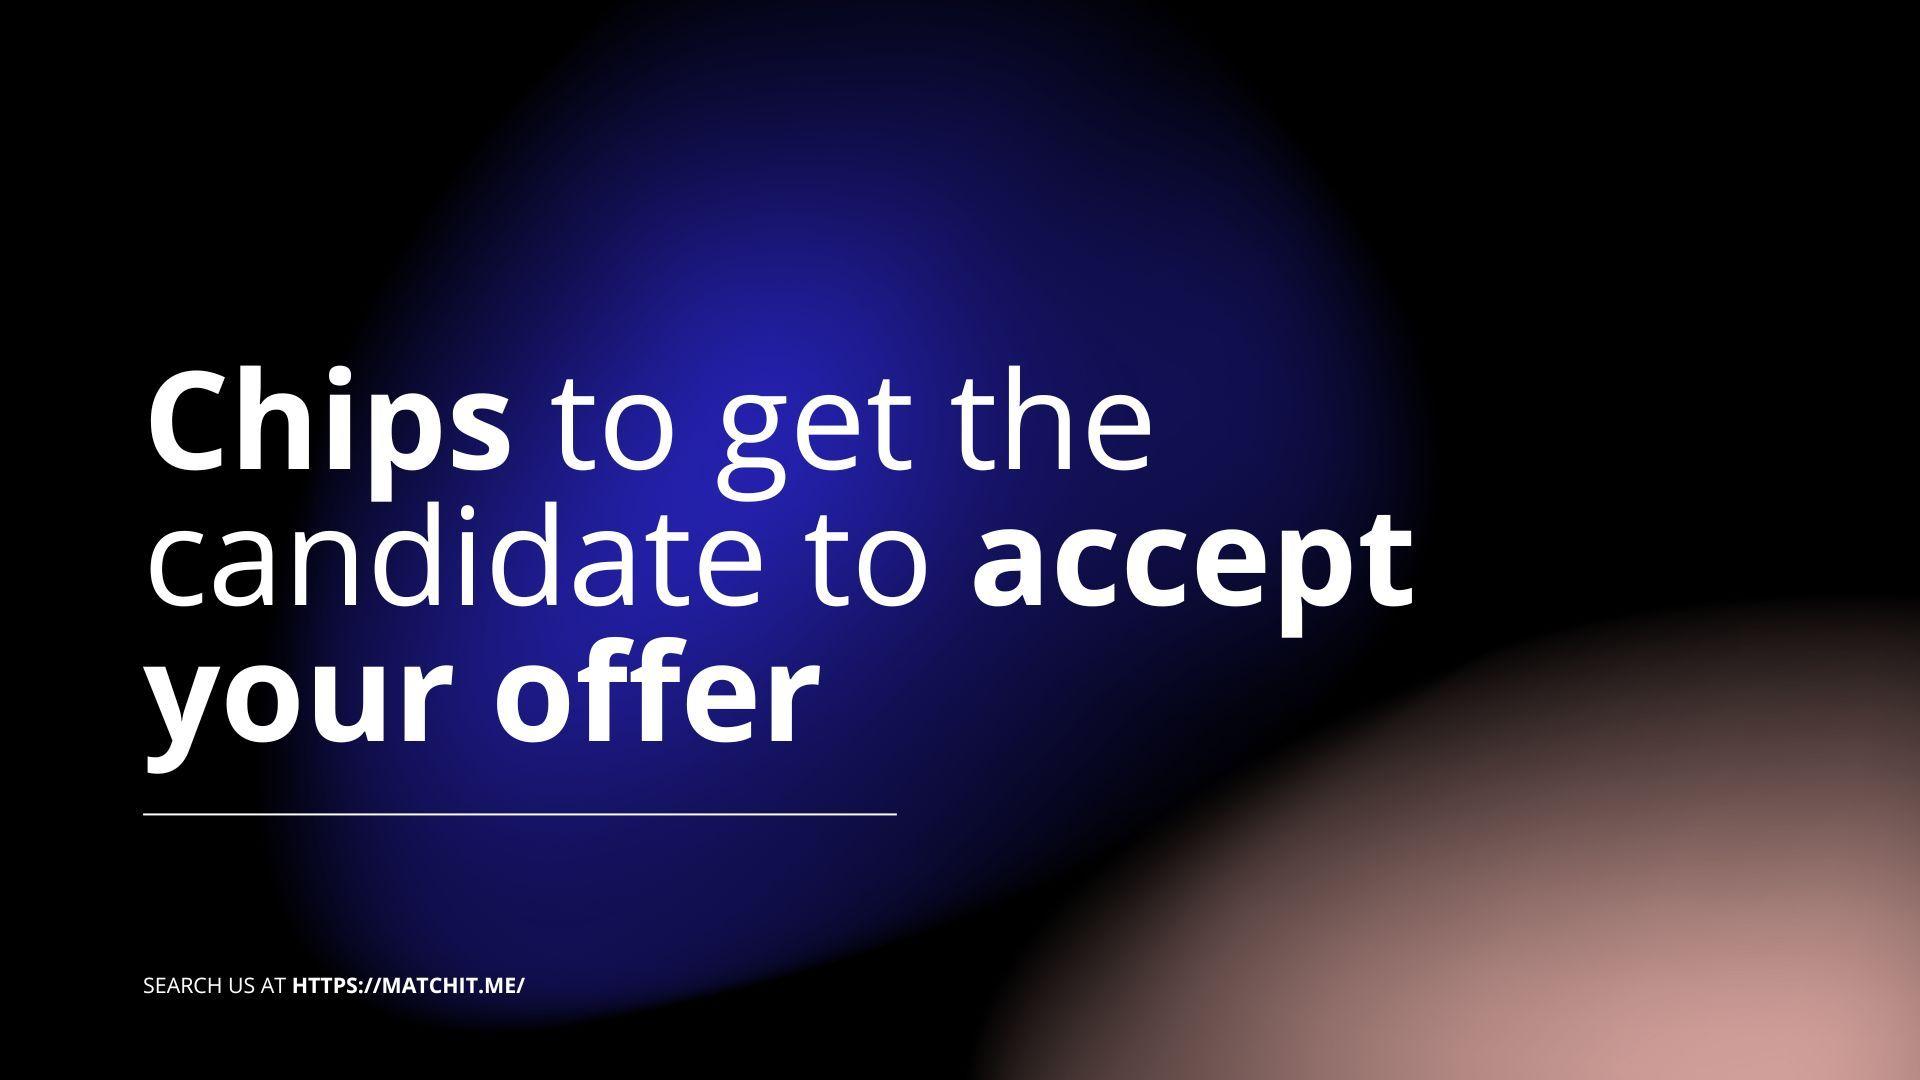 Chips-to-get-the-candidate-to-accept-your-offer